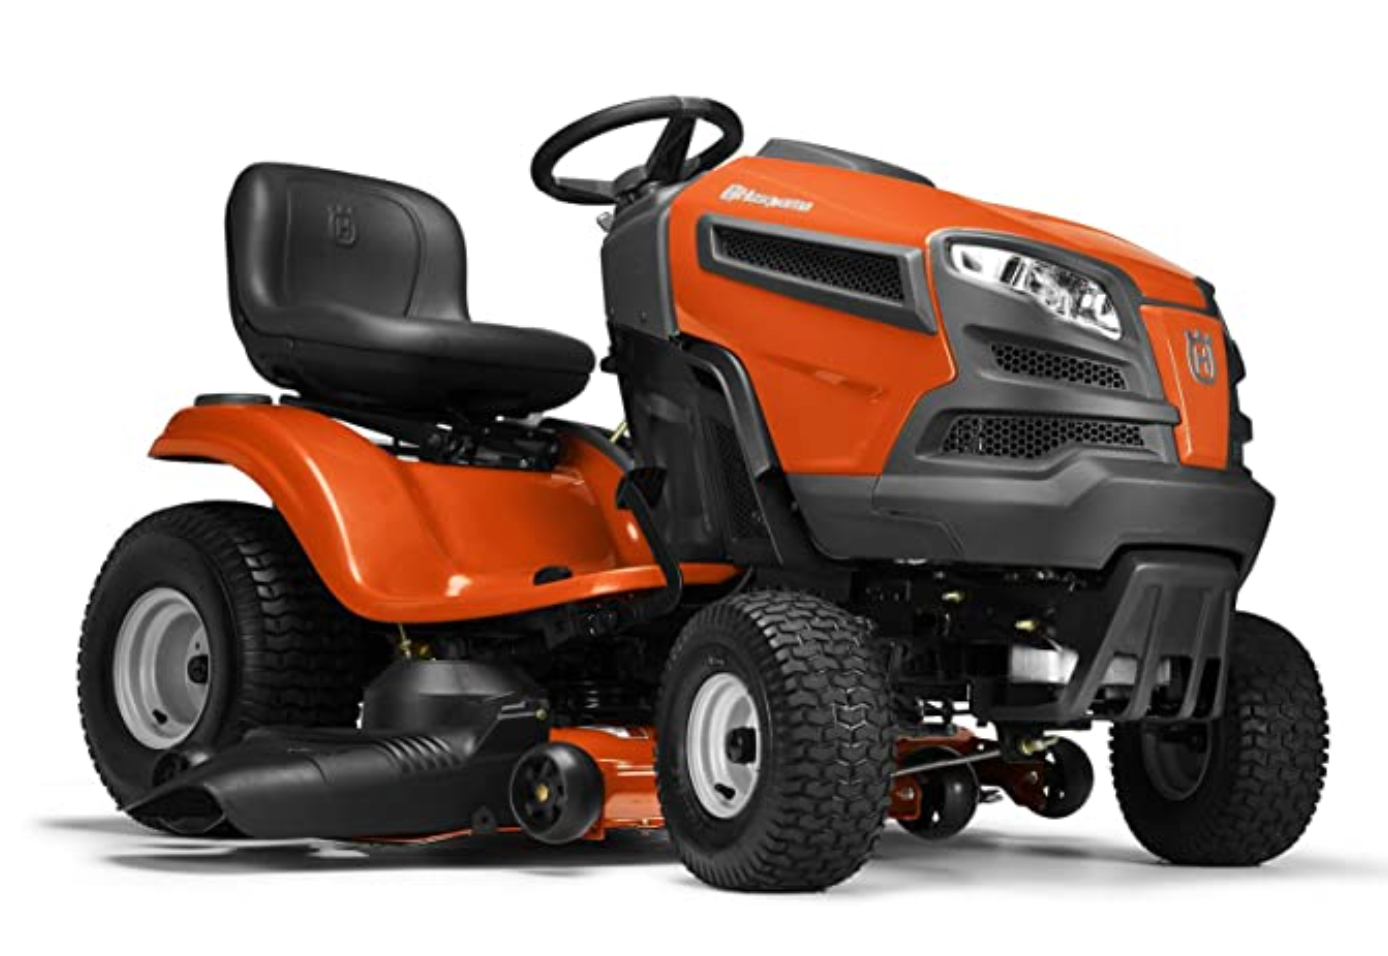 5 Best Riding Lawn Mowers for Hills and Steep Terrain In 2021